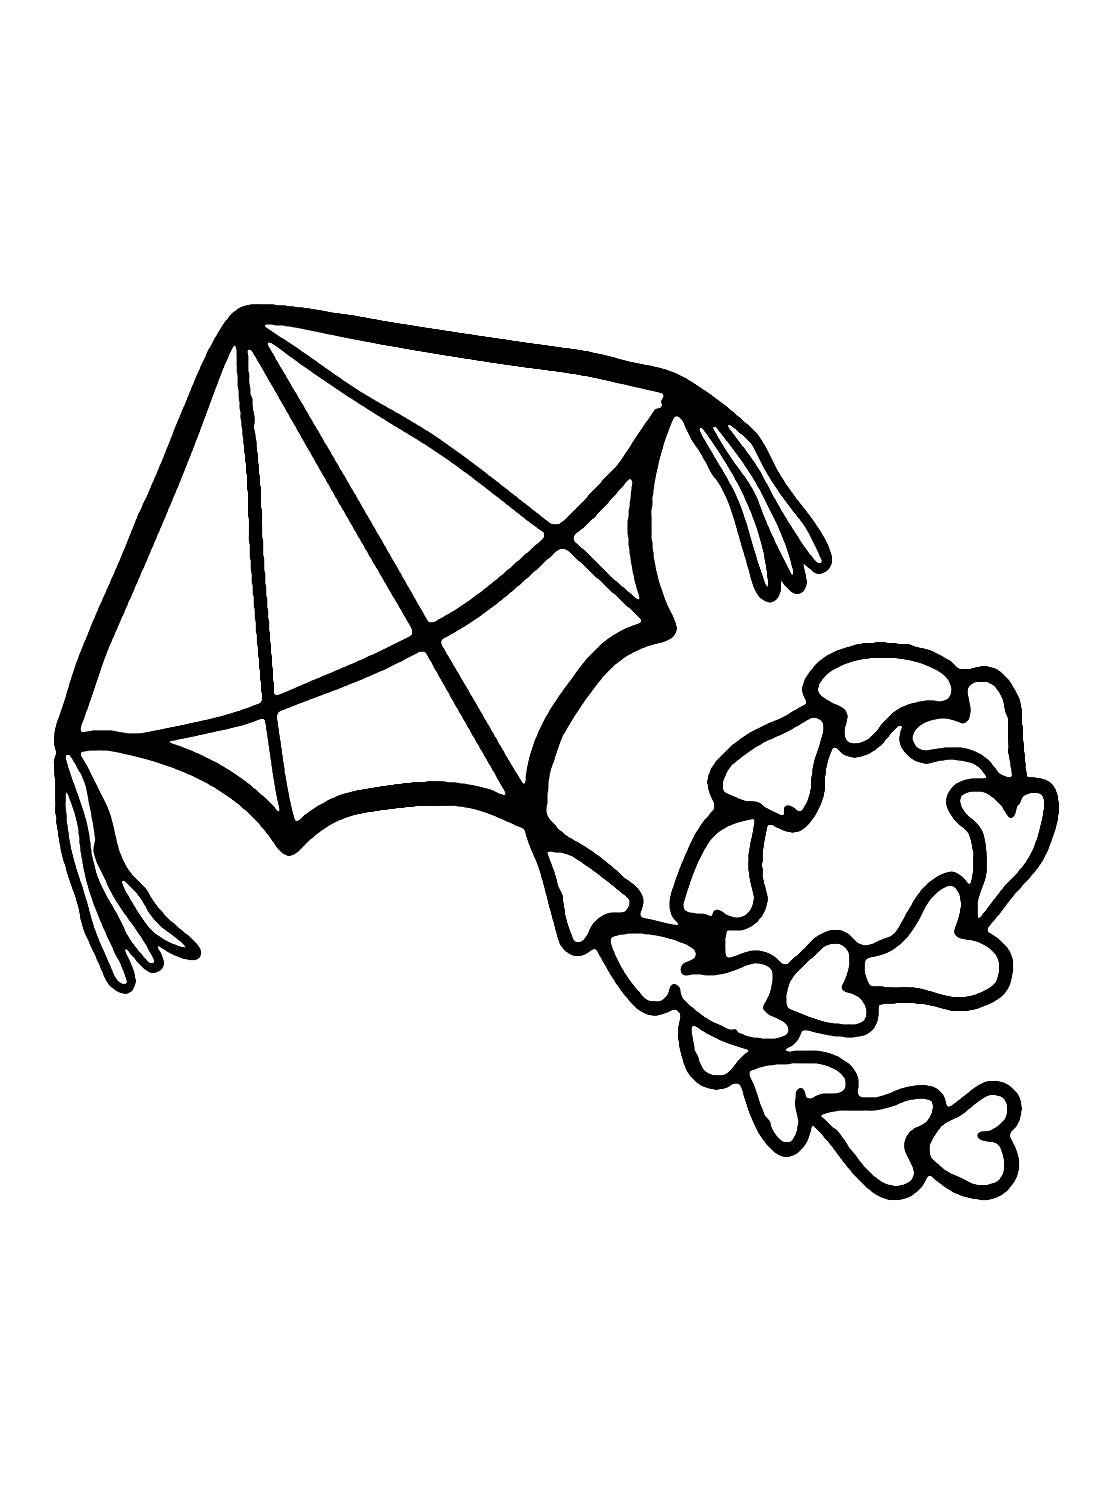 Printable Kite Images Coloring Page